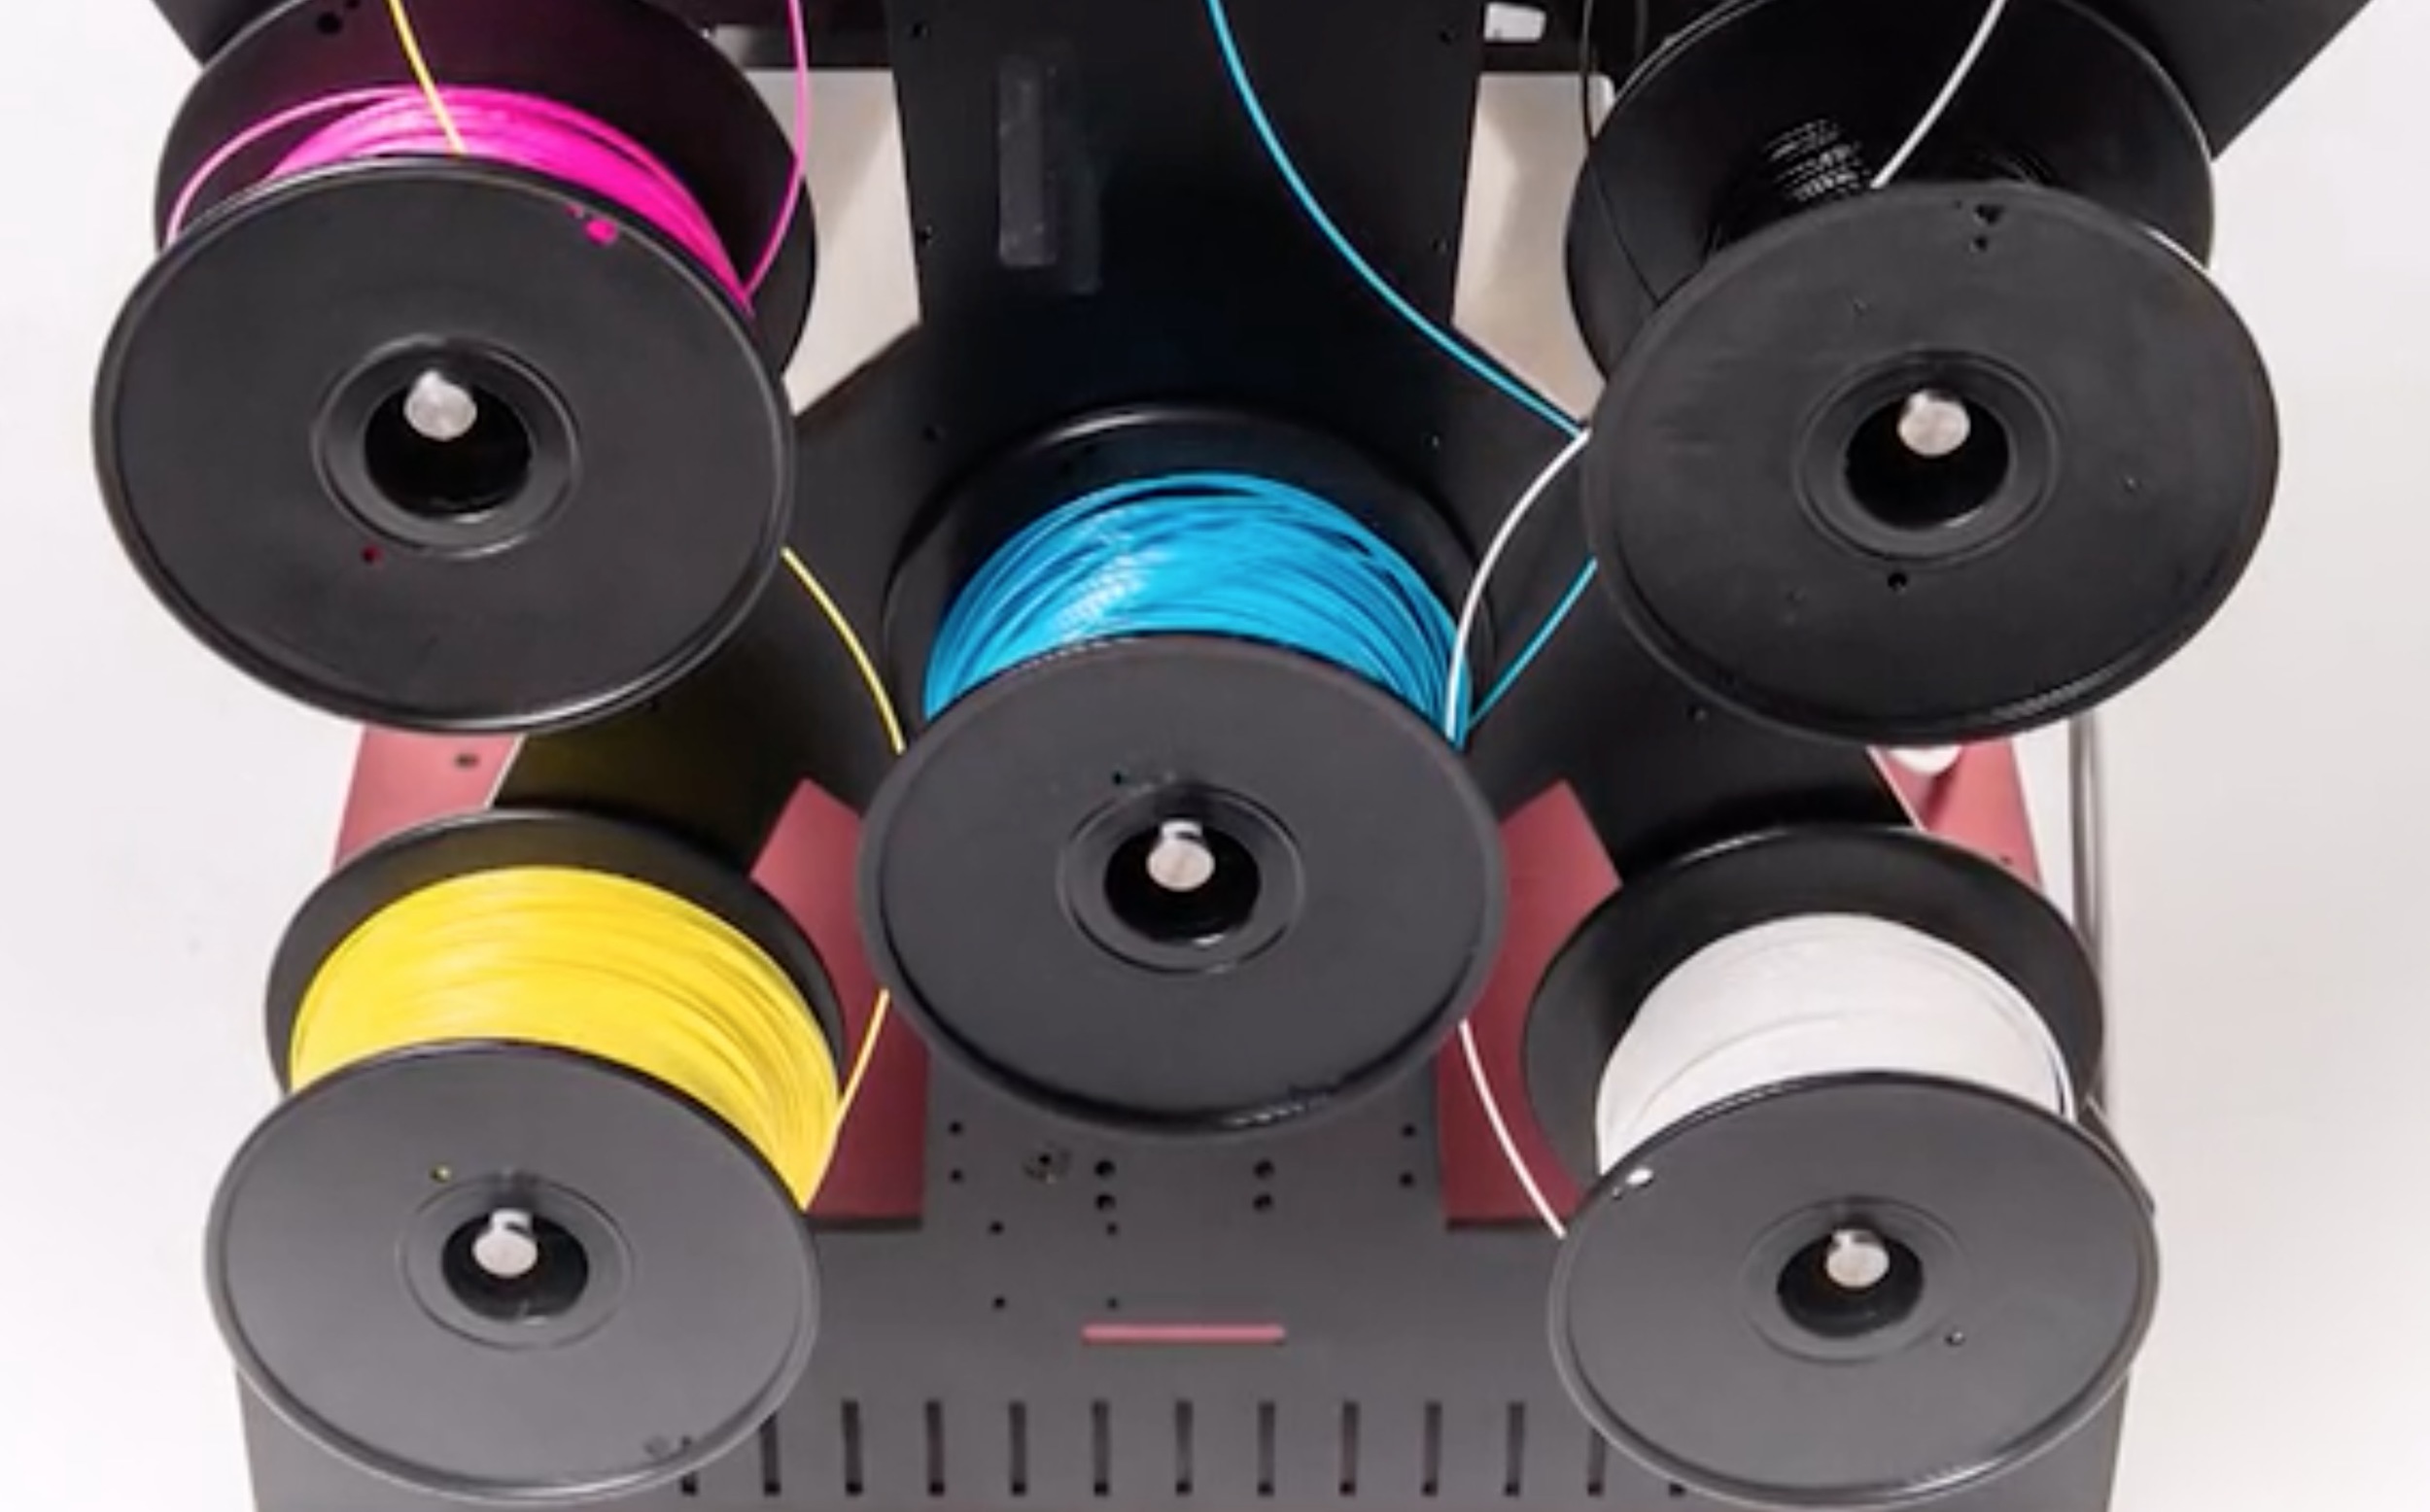  Five colors of filament are used by the RoVa4D 3D printer to generate any required color 